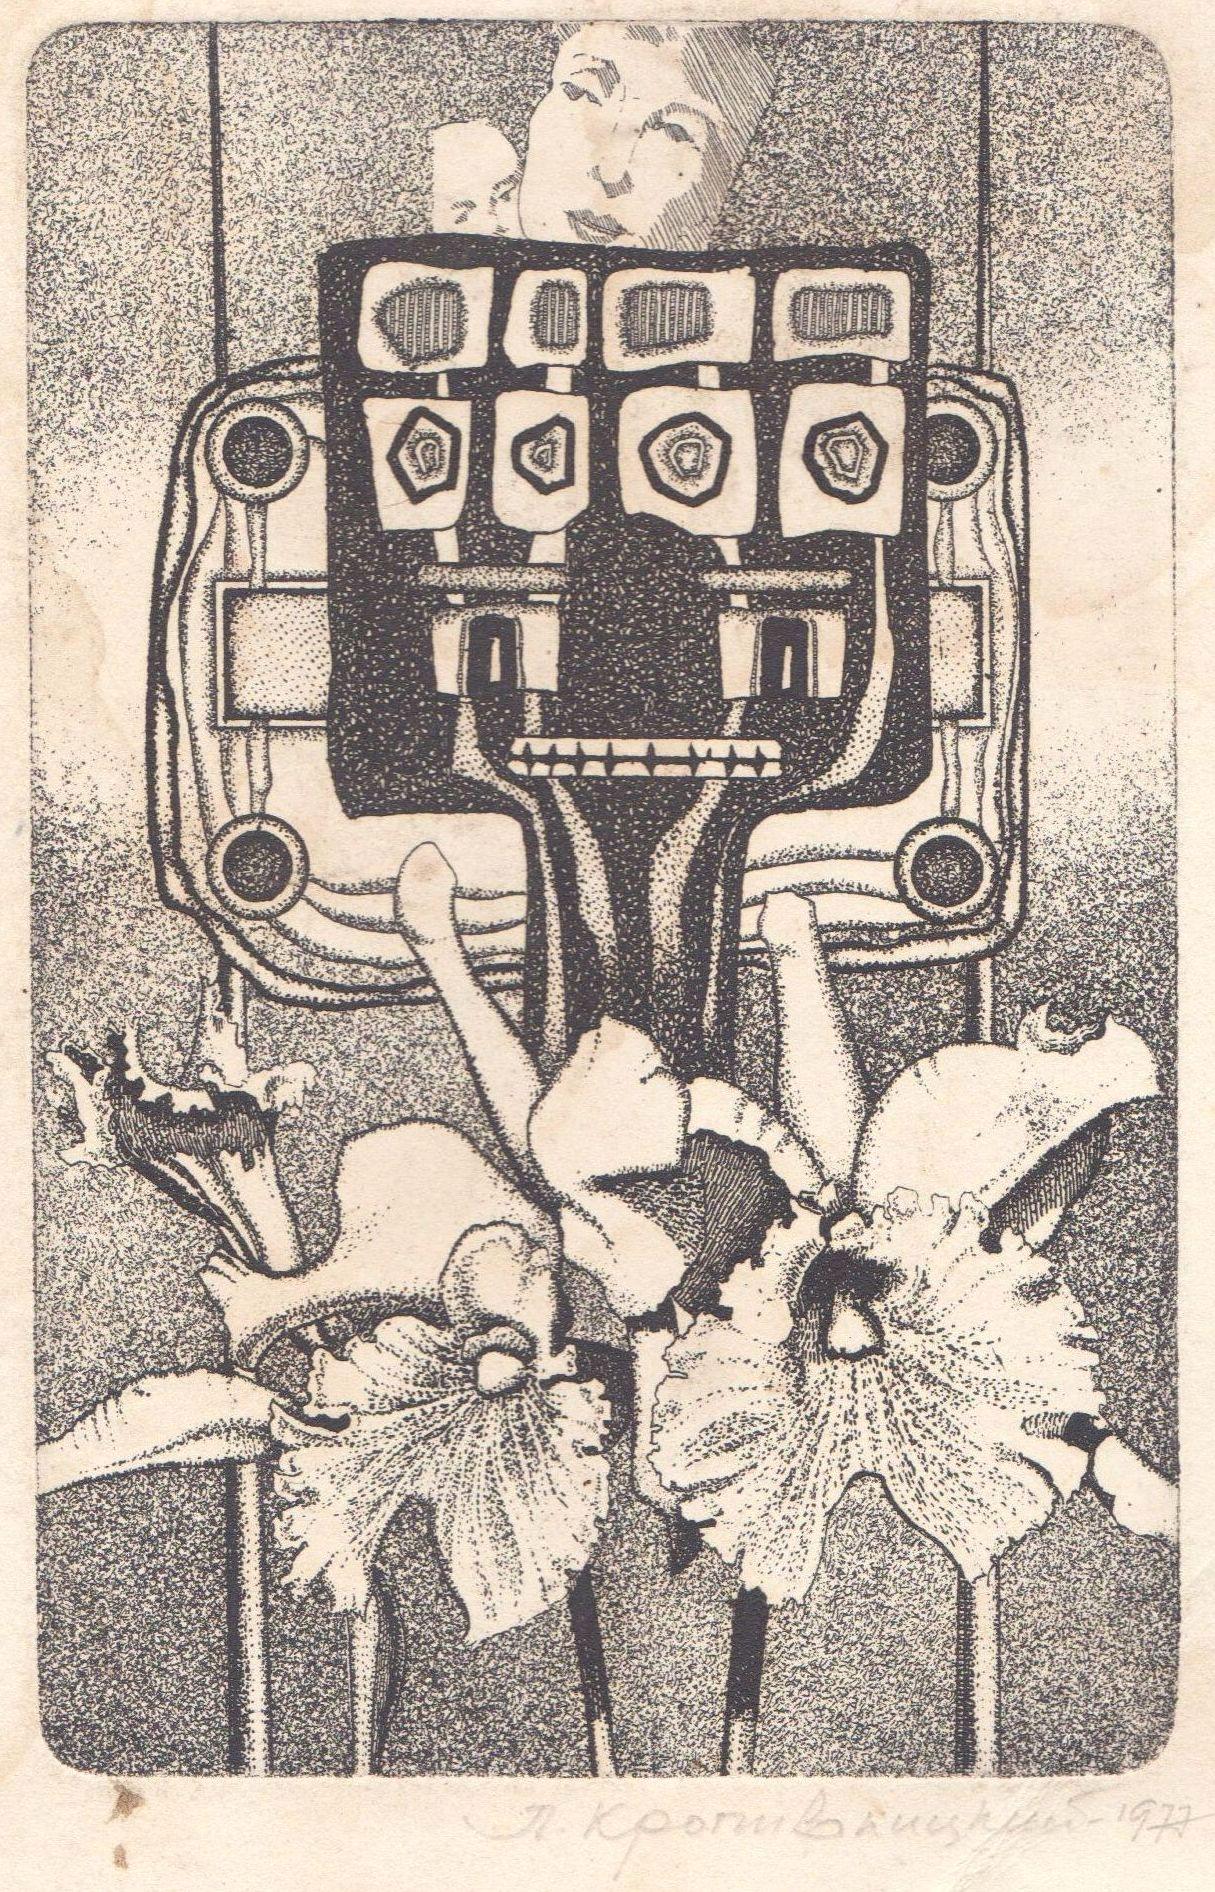 Lev Kropivnitsky Abstract Print - Robot and orchids. 1977, paper, etching, 16x10 cm